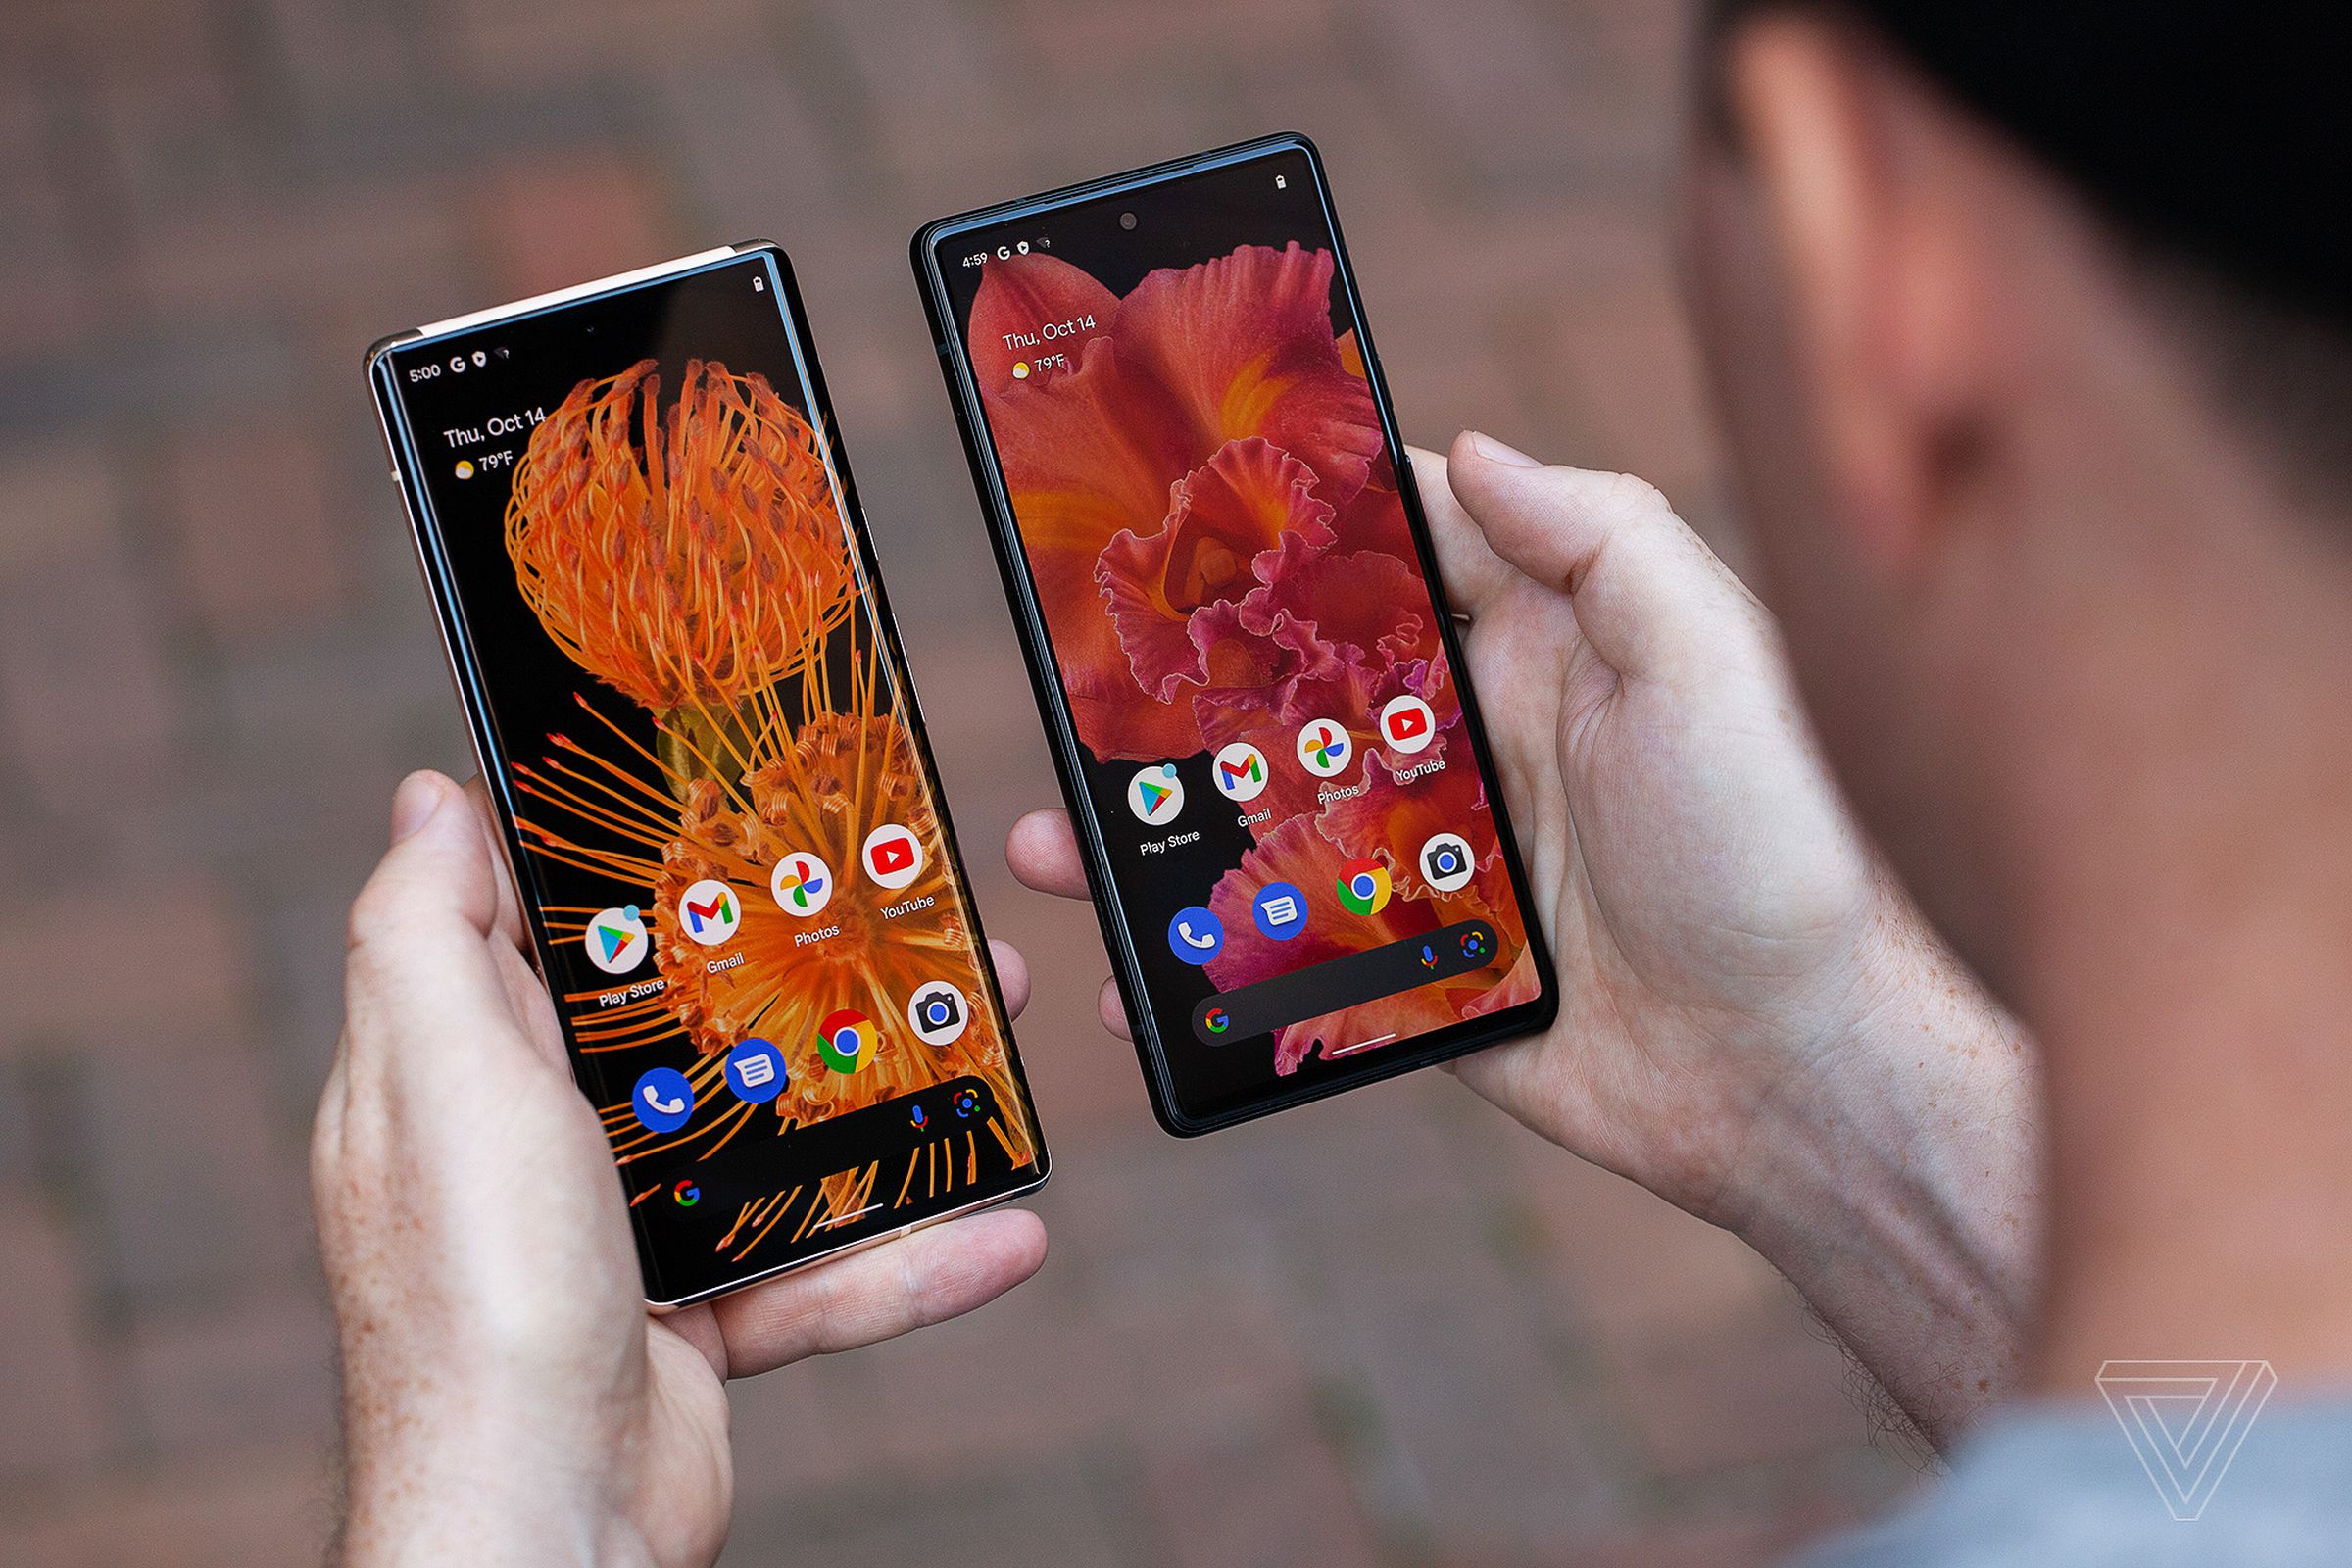 An image of Google’s Pixel 6 Pro and Pixel 6 being held in a person’s left and right hands.